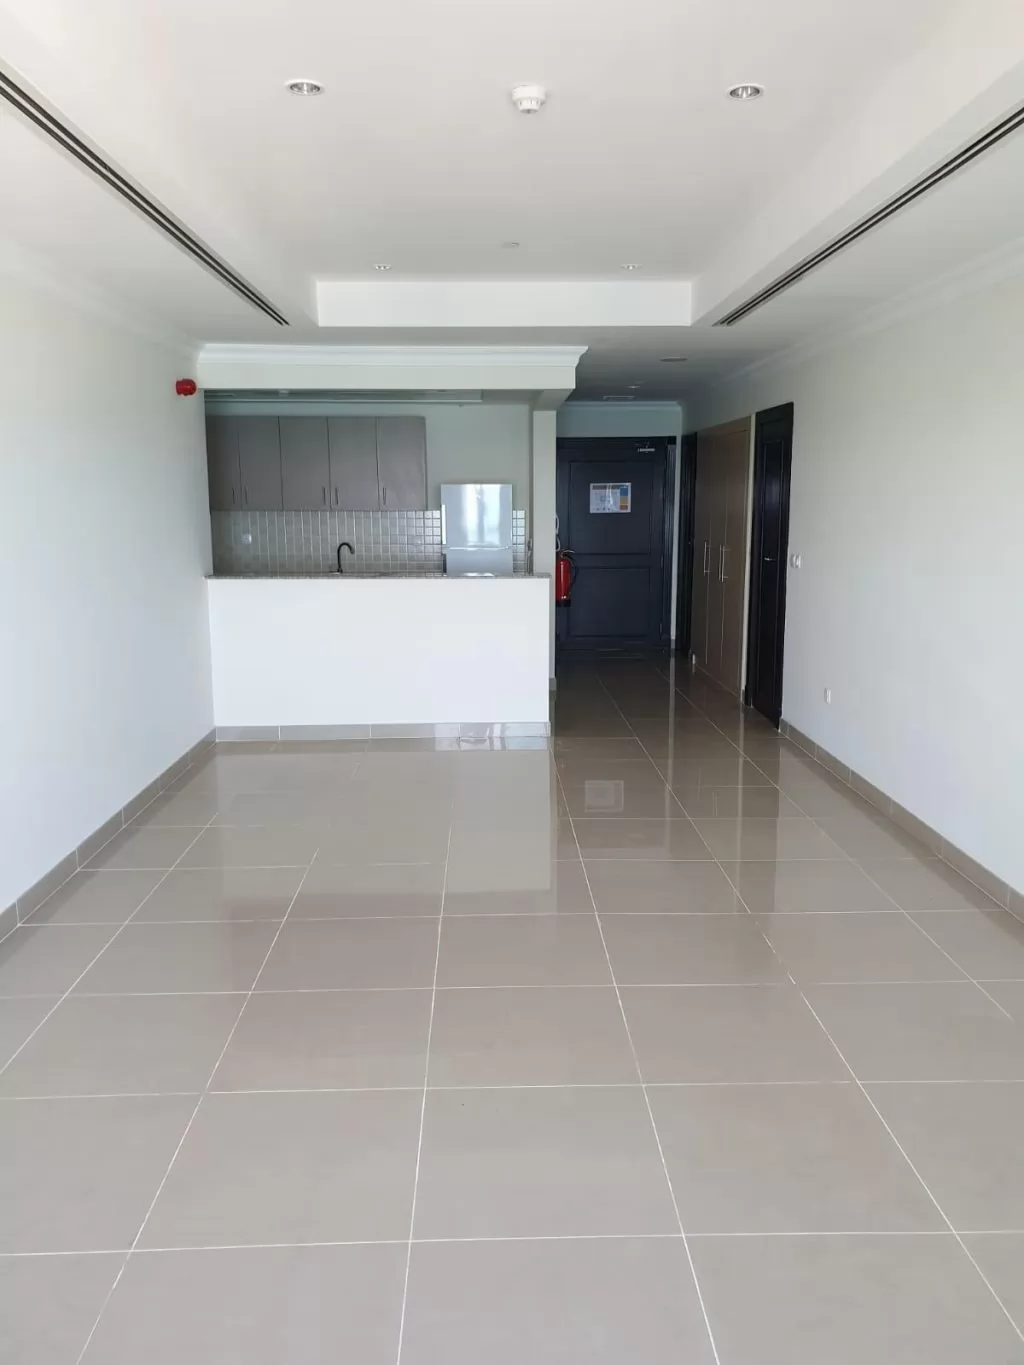 Residential Ready Property Studio S/F Apartment  for rent in The-Pearl-Qatar , Doha-Qatar #16461 - 1  image 